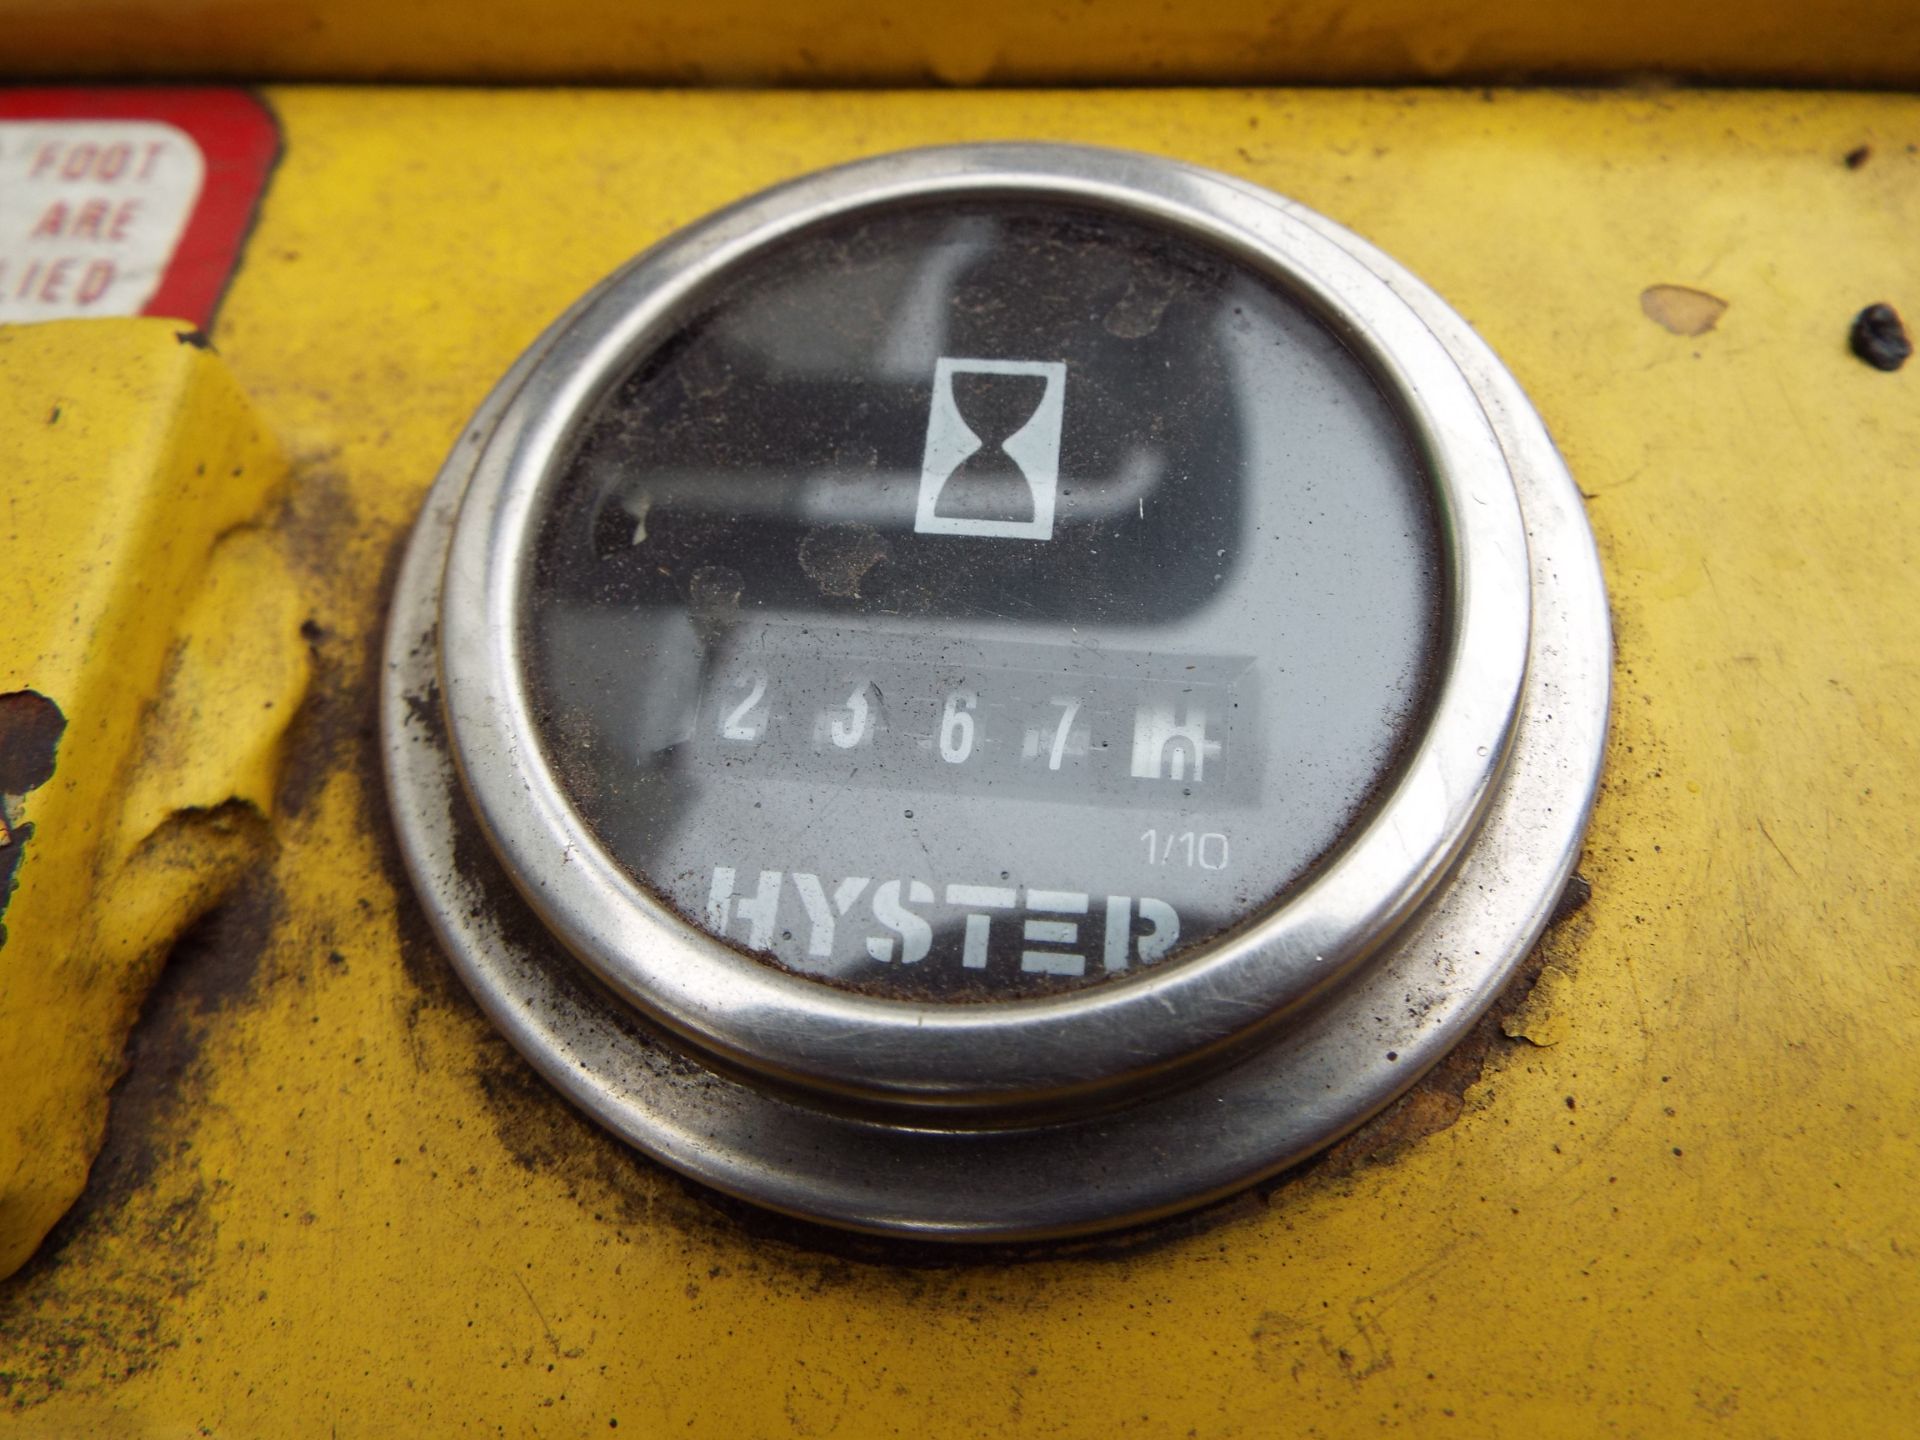 Hyster E2.00 XL Fork Lift Truck cw Charger - Image 6 of 7